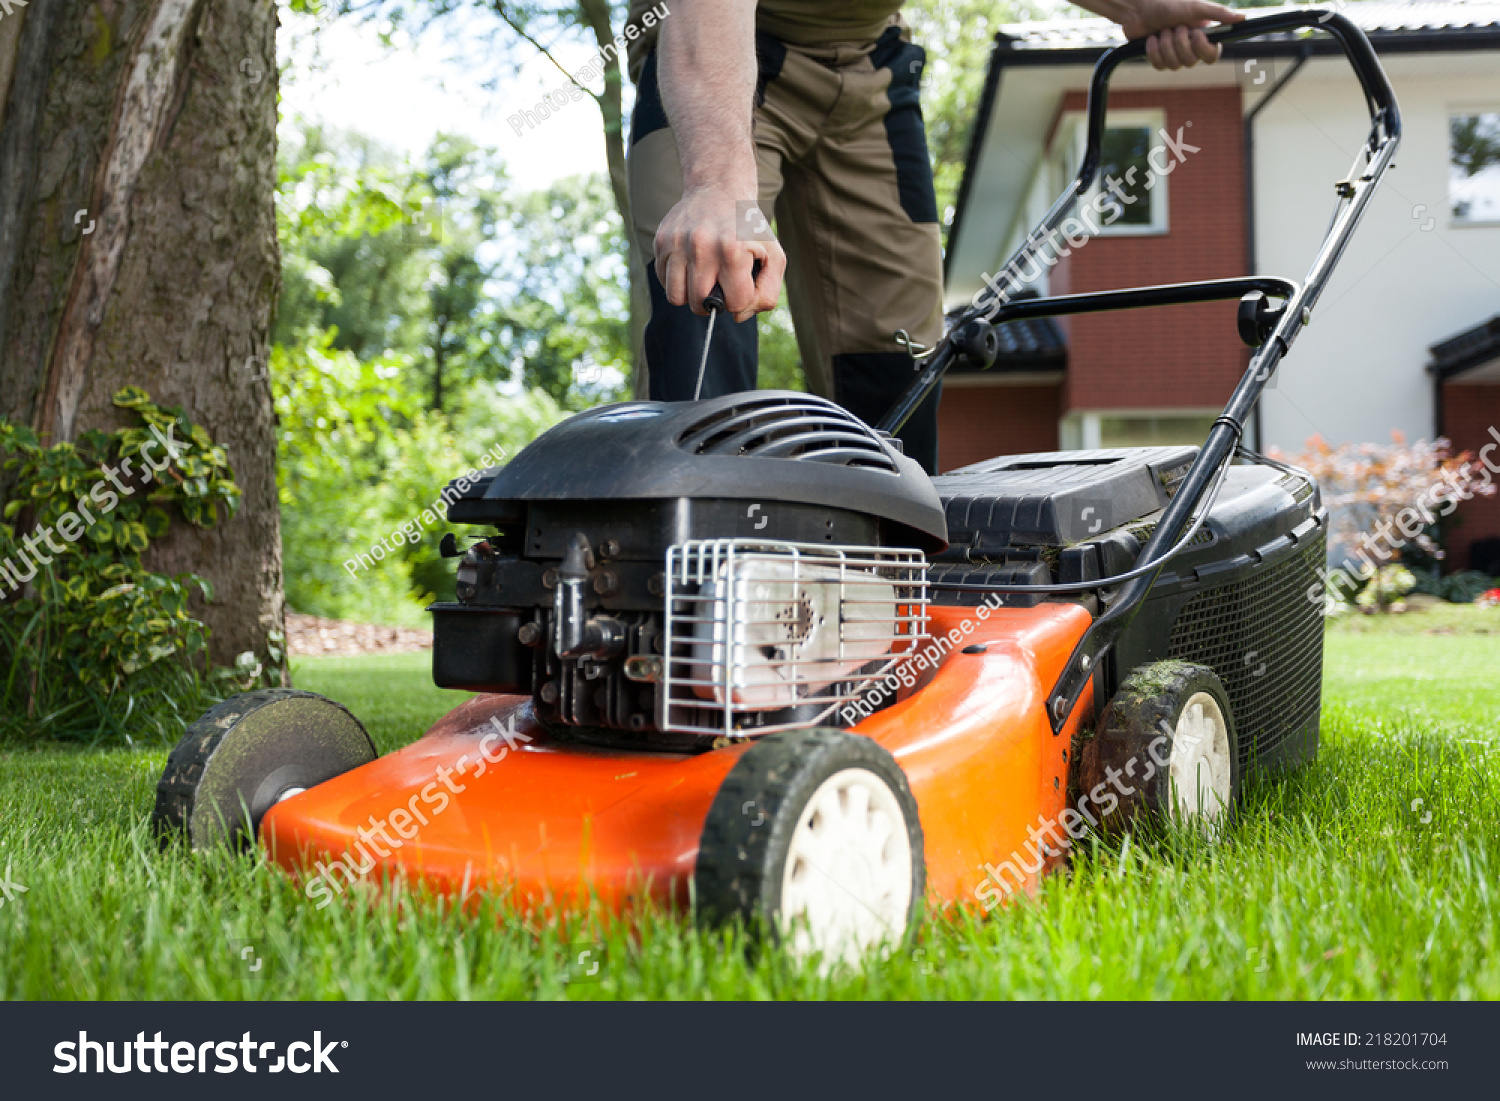 Turning on the lawn mower by gardener #218201704